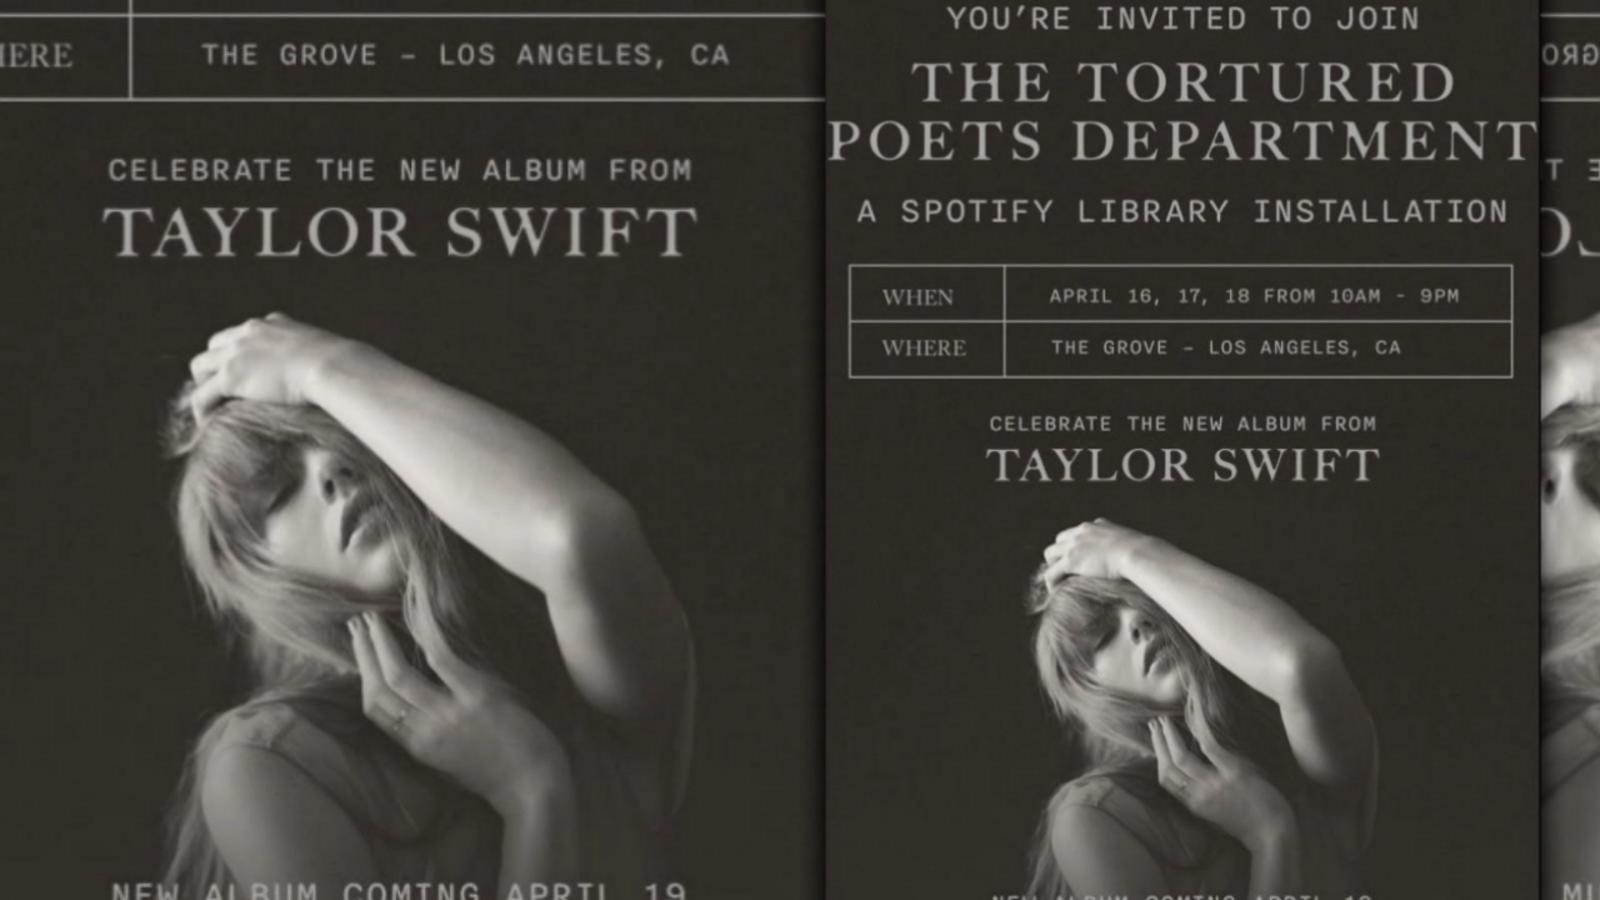 VIDEO: Taylor Swift fans count down to release of ‘The Tortured Poets Department’